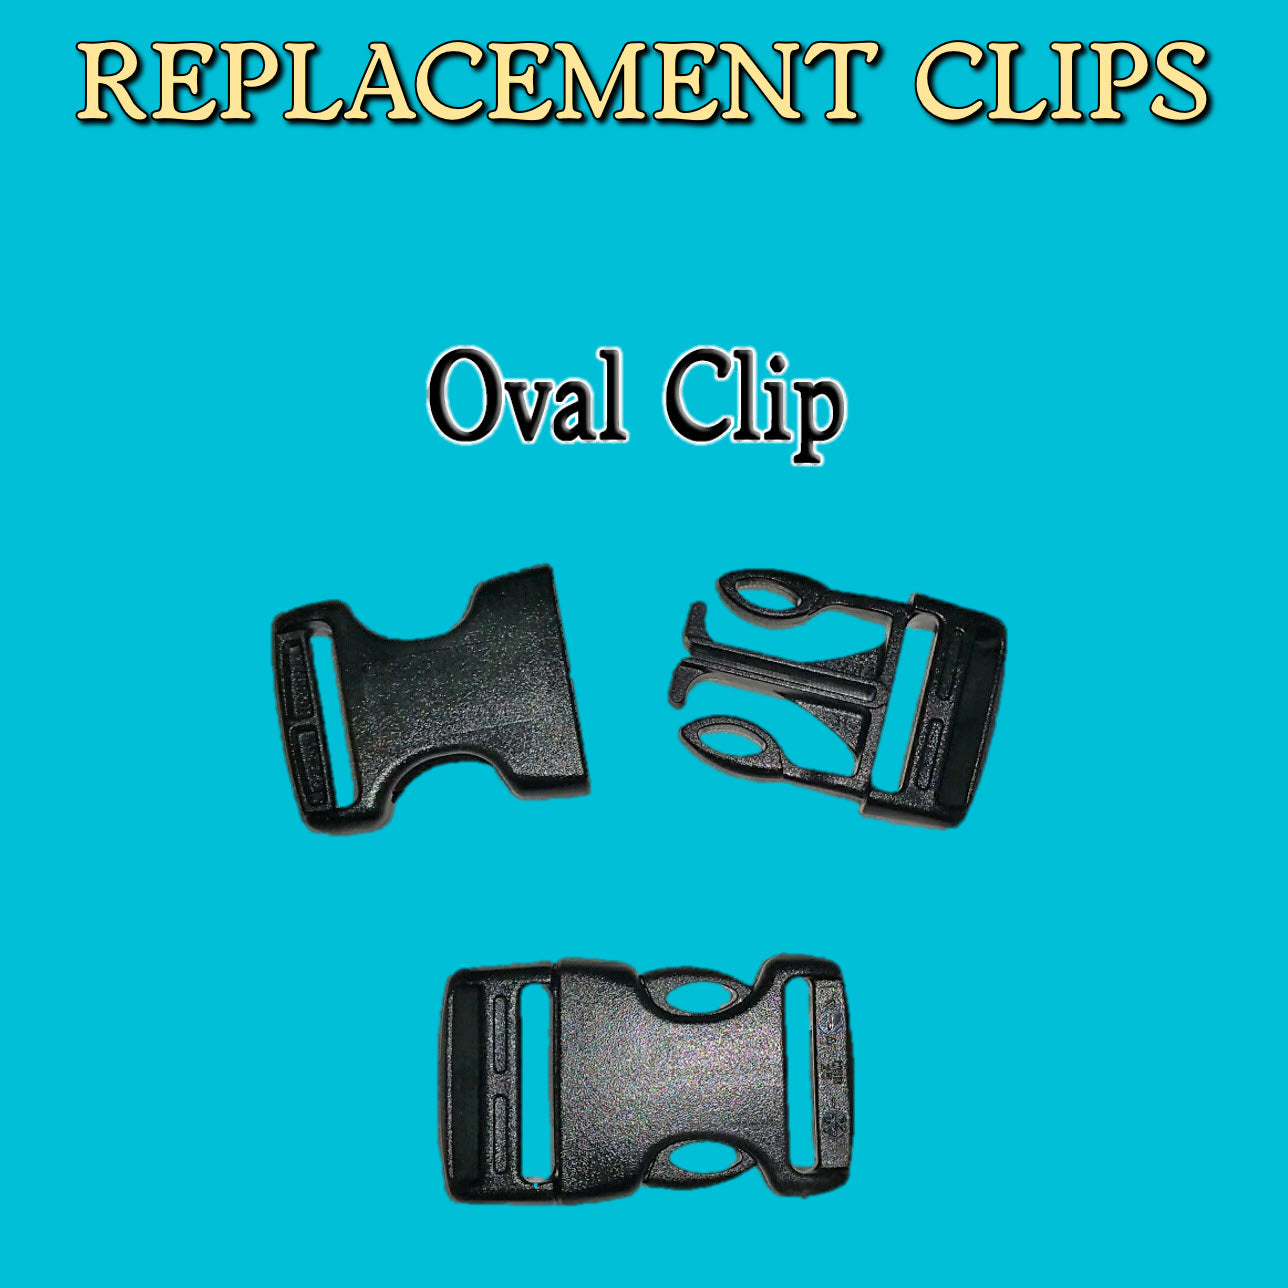 Replacement Clip for Recovery Vizor or some EquiVizor Fly Masks